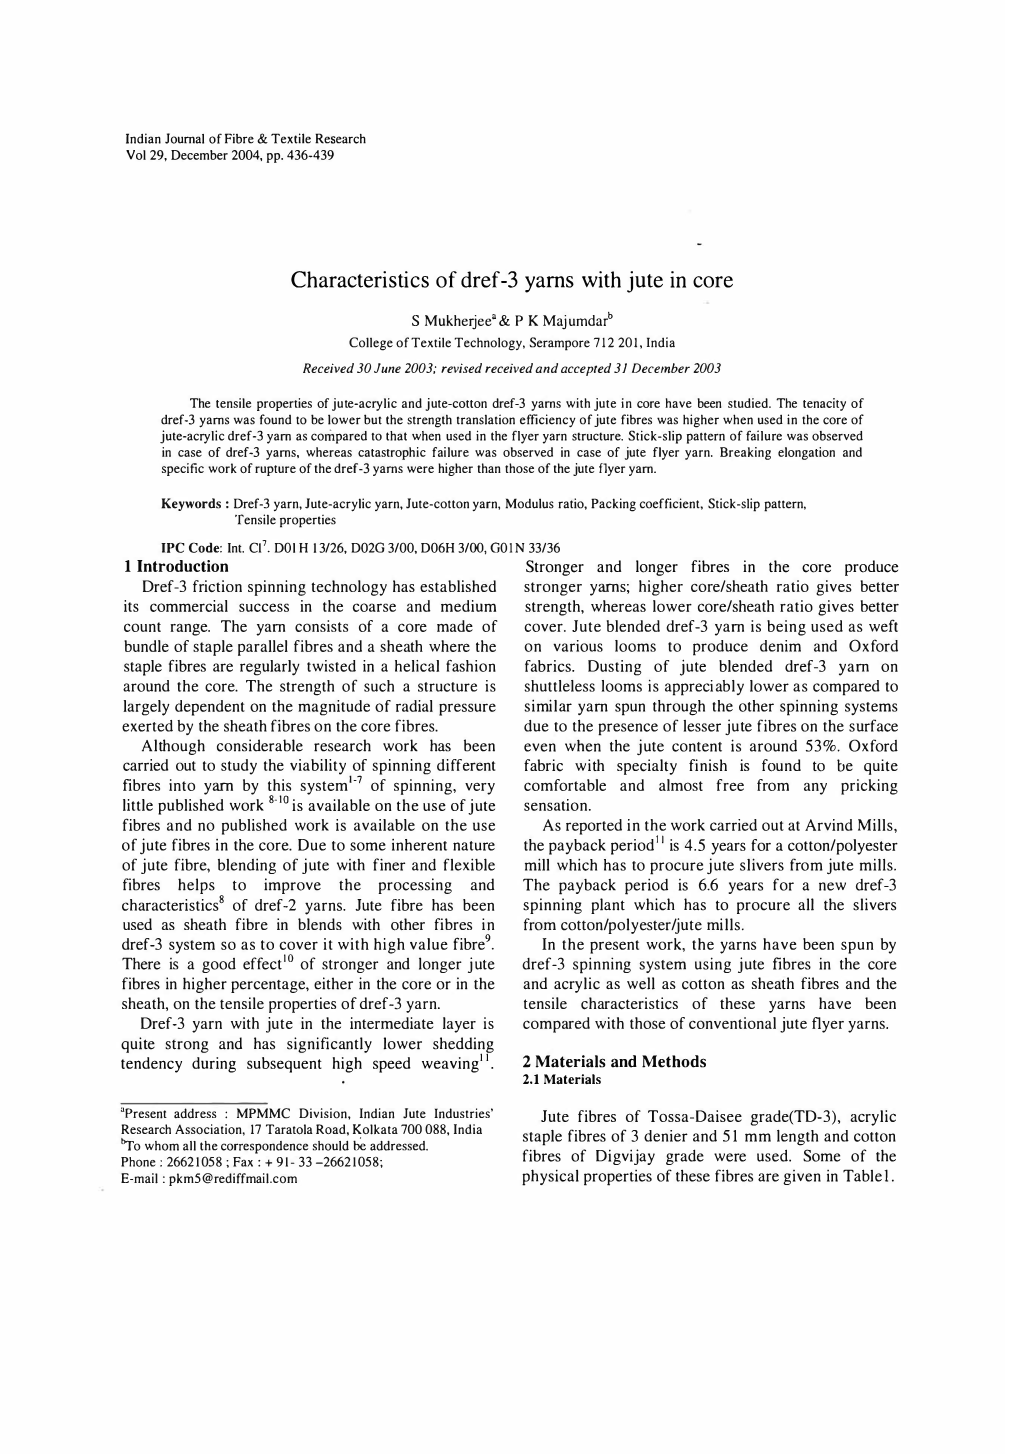 Characteristics of Dref-3 Yams with Jute in Core Stronger and Longer Fibres